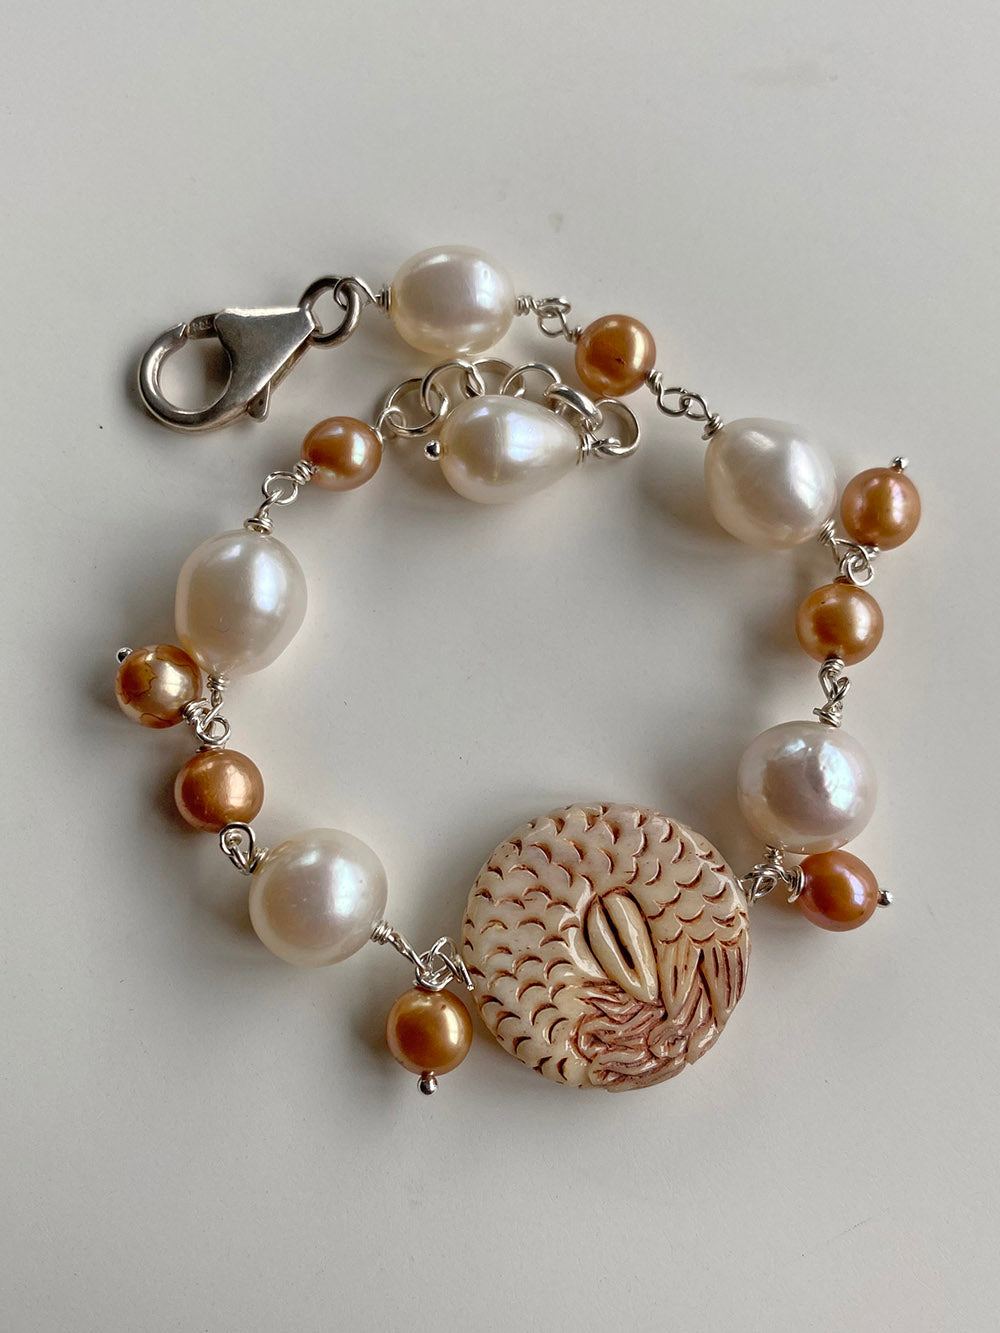 Carved Bone Mermaid Bracelet with Gold and White Freshwater Pearls by Linda Queally